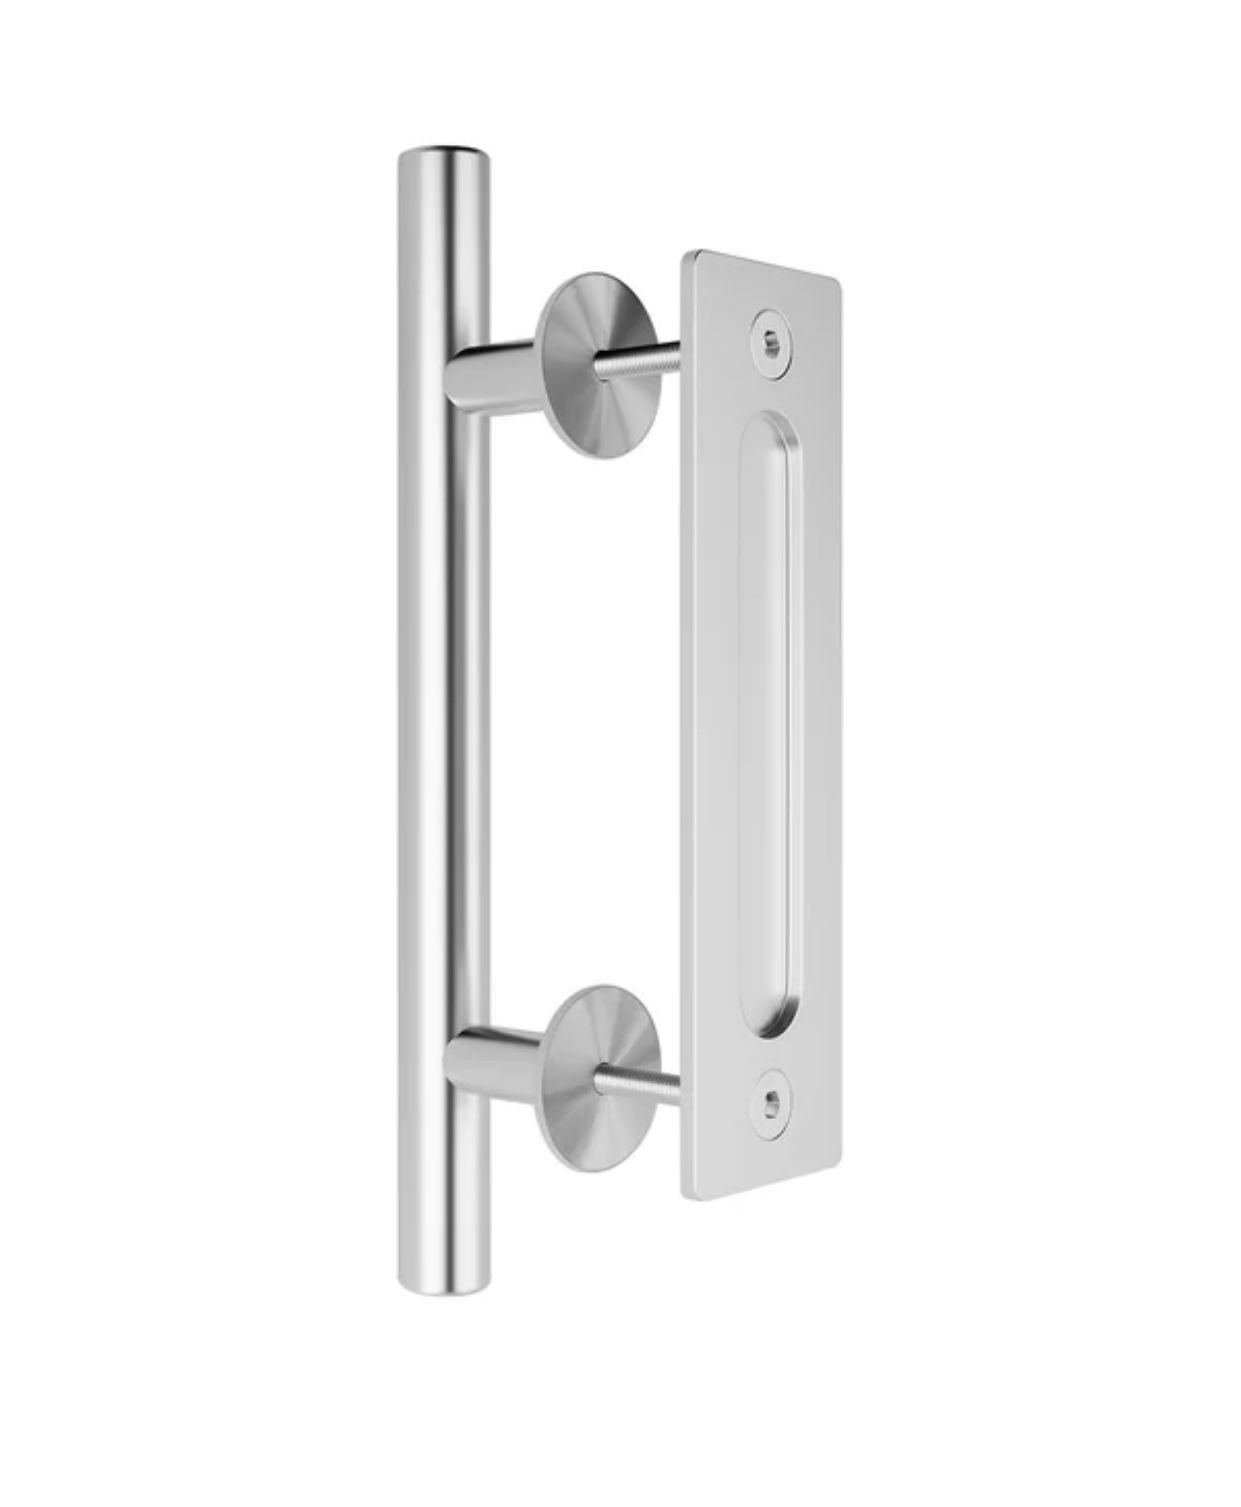 Barn Door Handle/Pull in stainless steel: MSRP $50. Our price $32 + sales tax 